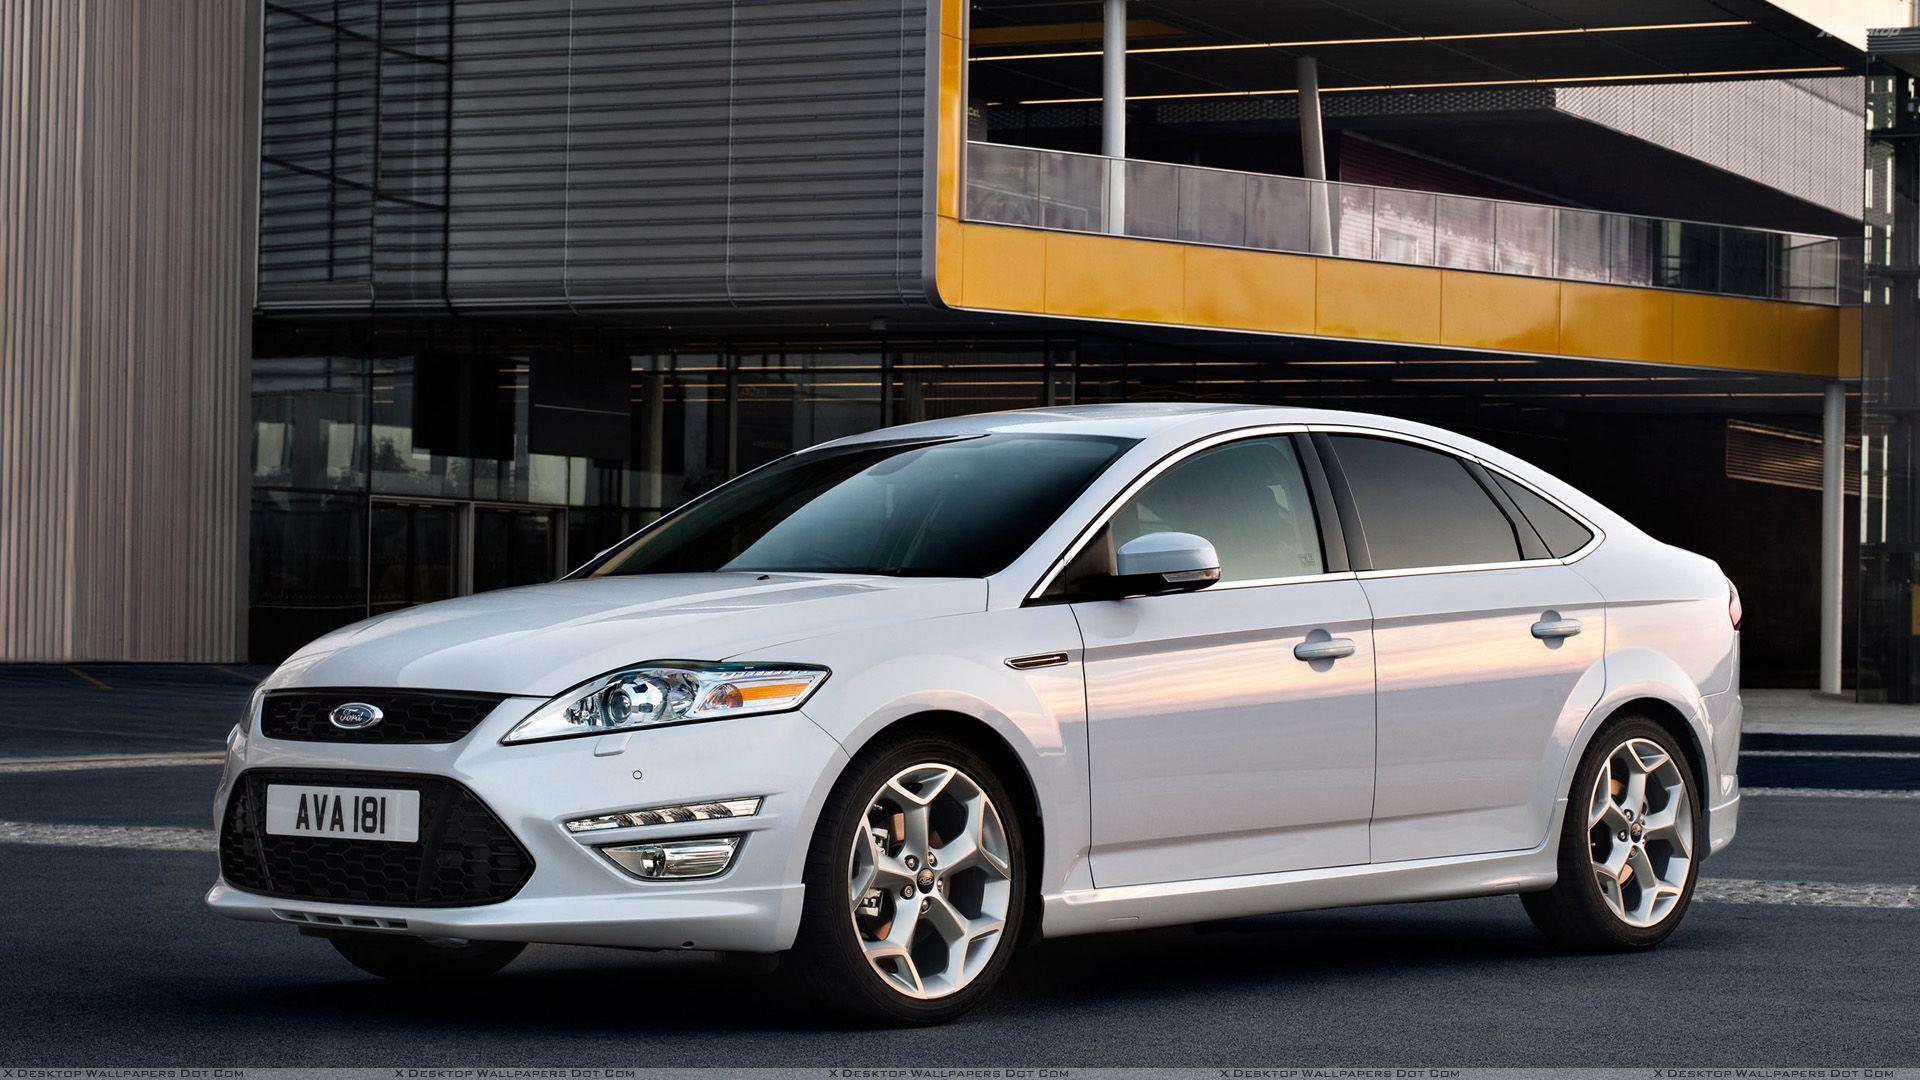 Ford Mondeo Wallpaper, Photo & Image in HD